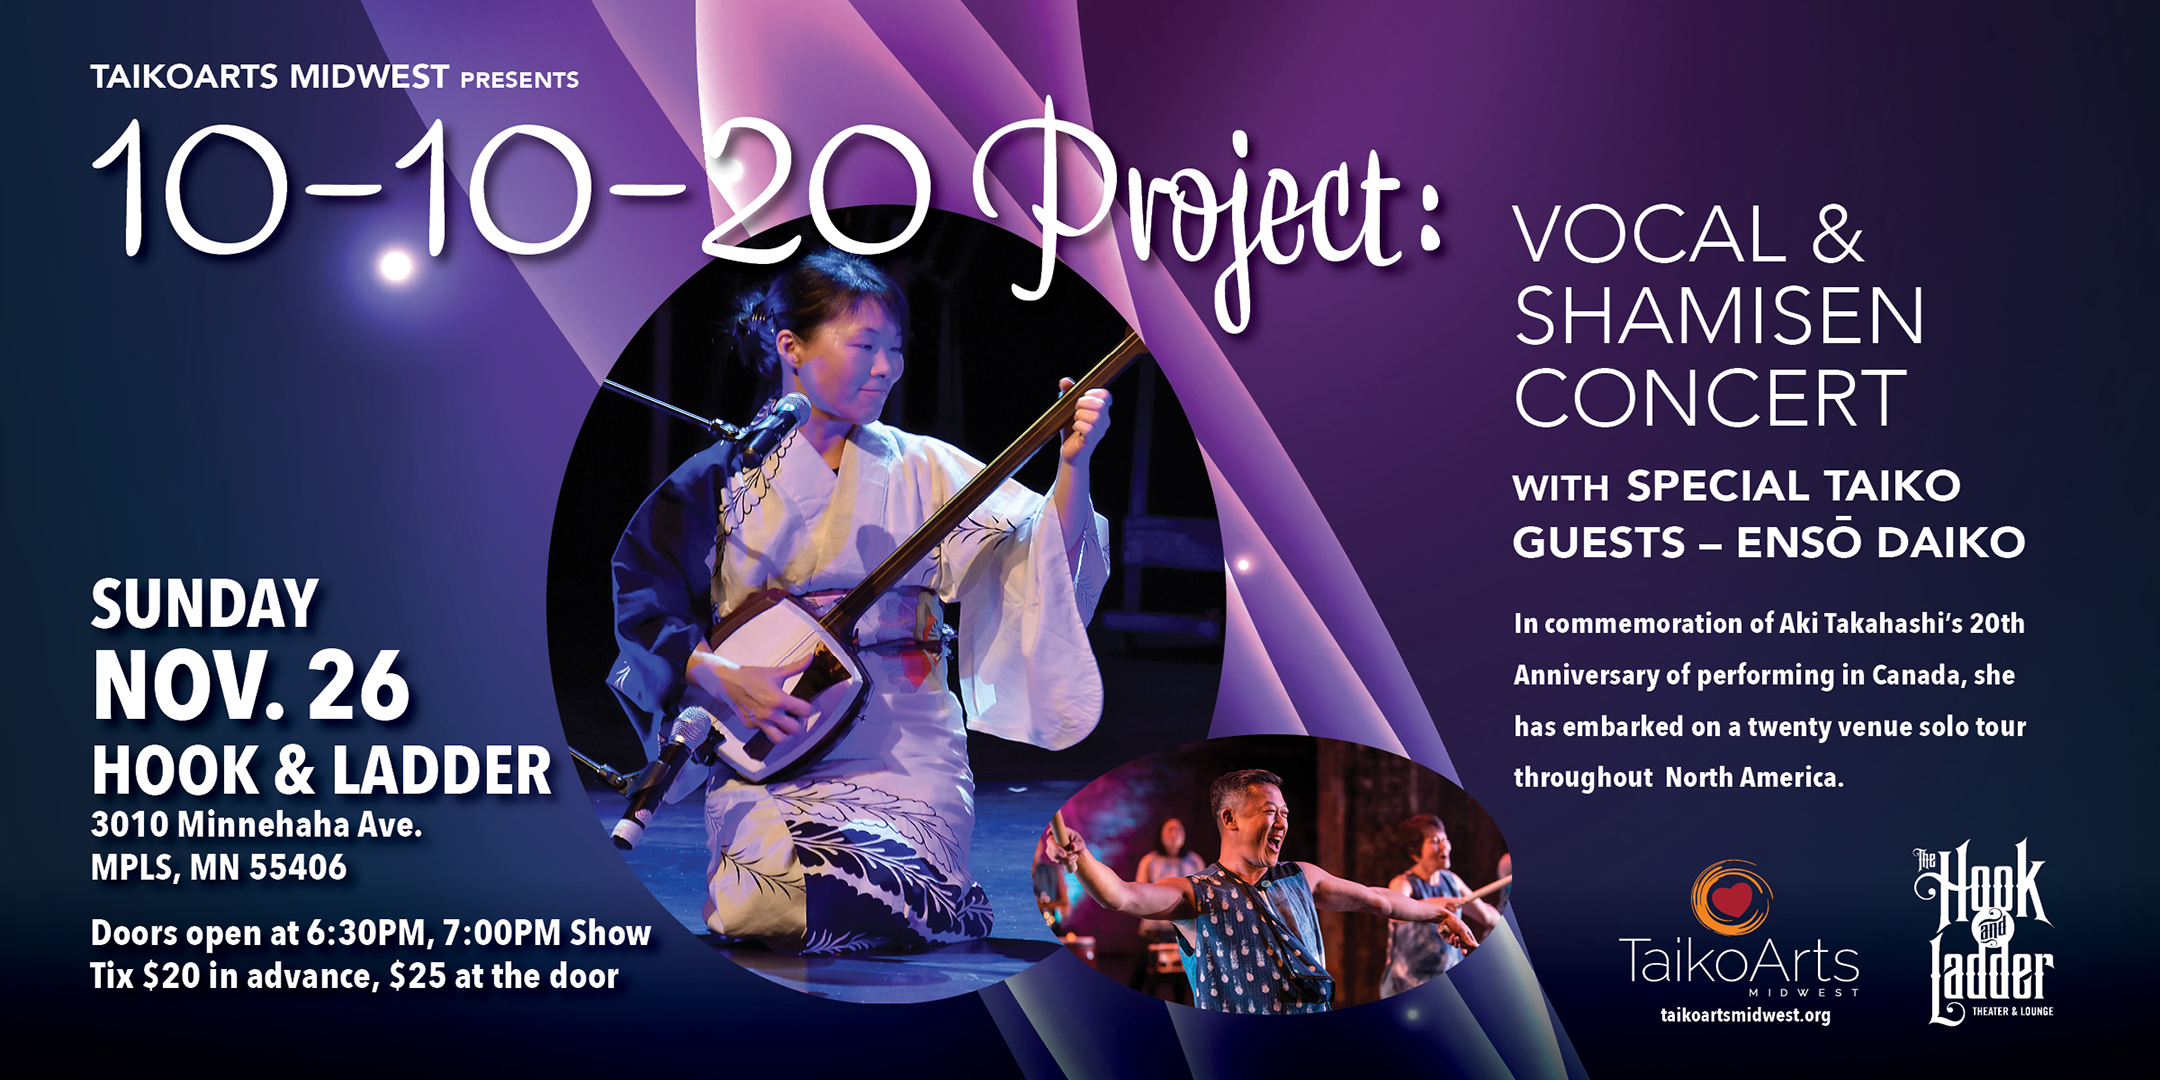 TaikoArts Midwest presents 10.10.20 Project: Vocal & Shamisen Concert with special Taiko guests - Enso Daiko Sunday, November 26 The Hook and Ladder Theater Doors 6:30pm :: Show 7pm $20 ADV / $25 DOS (General Admission Seating. Seats Available on a first-come first-served basis)